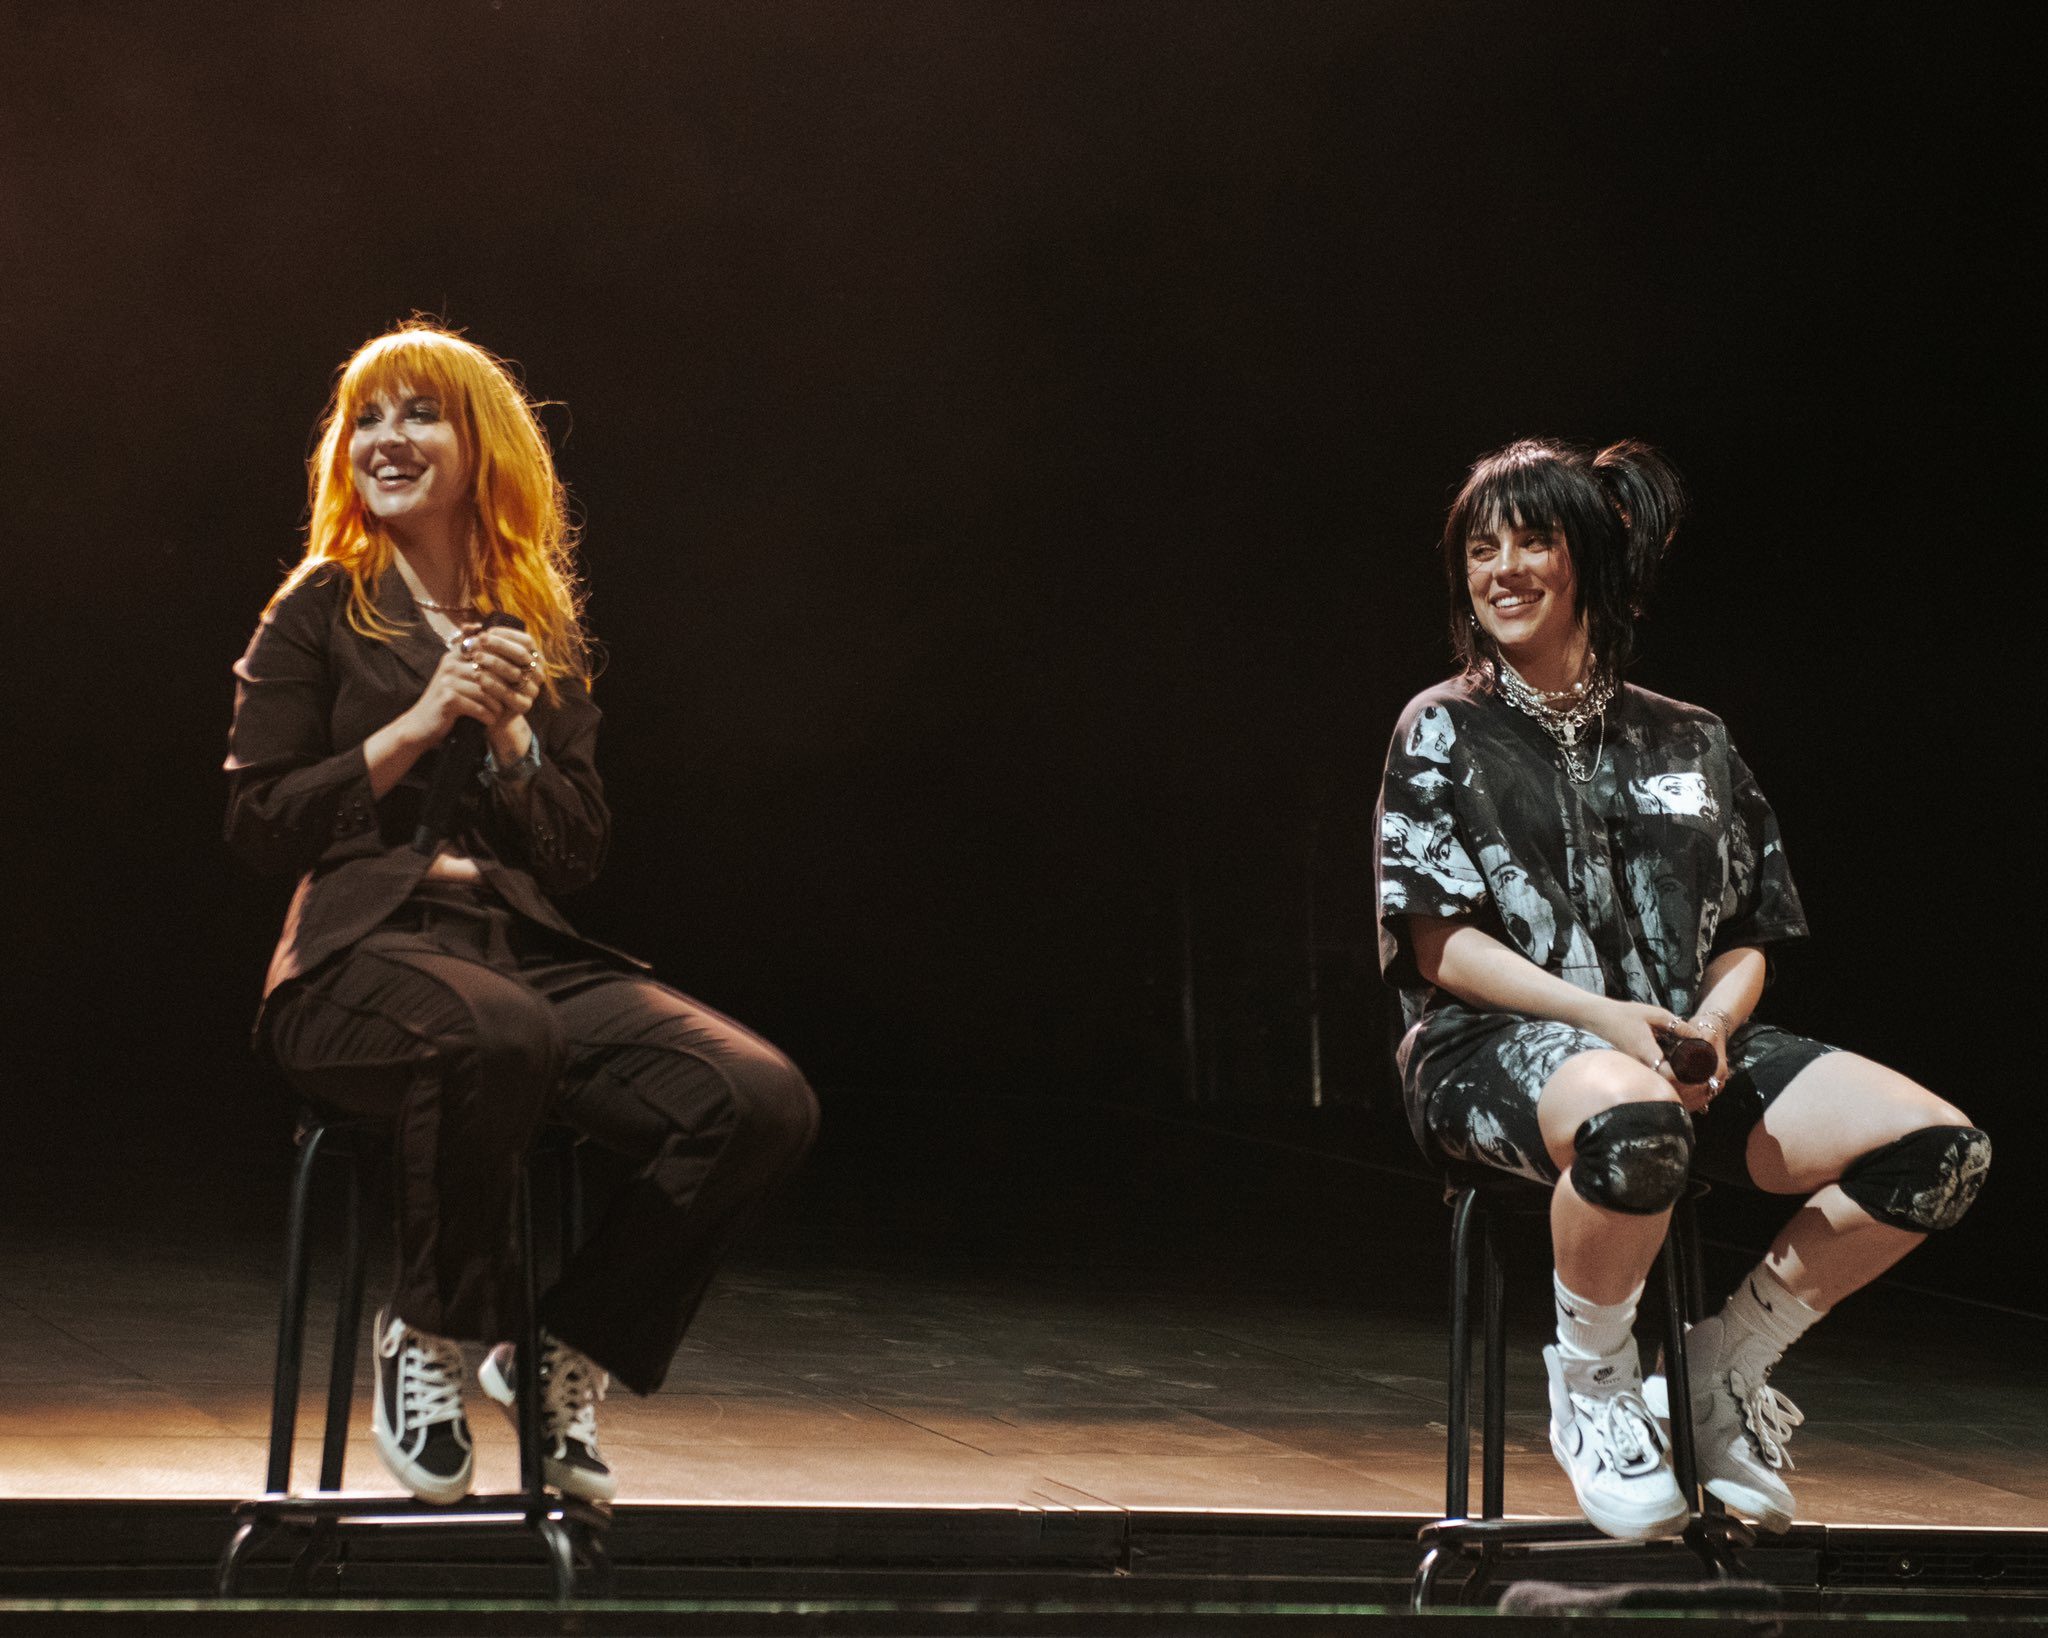 Hayley Williams performs 'Misery Business' with Billie Eilish at Coachella  2022